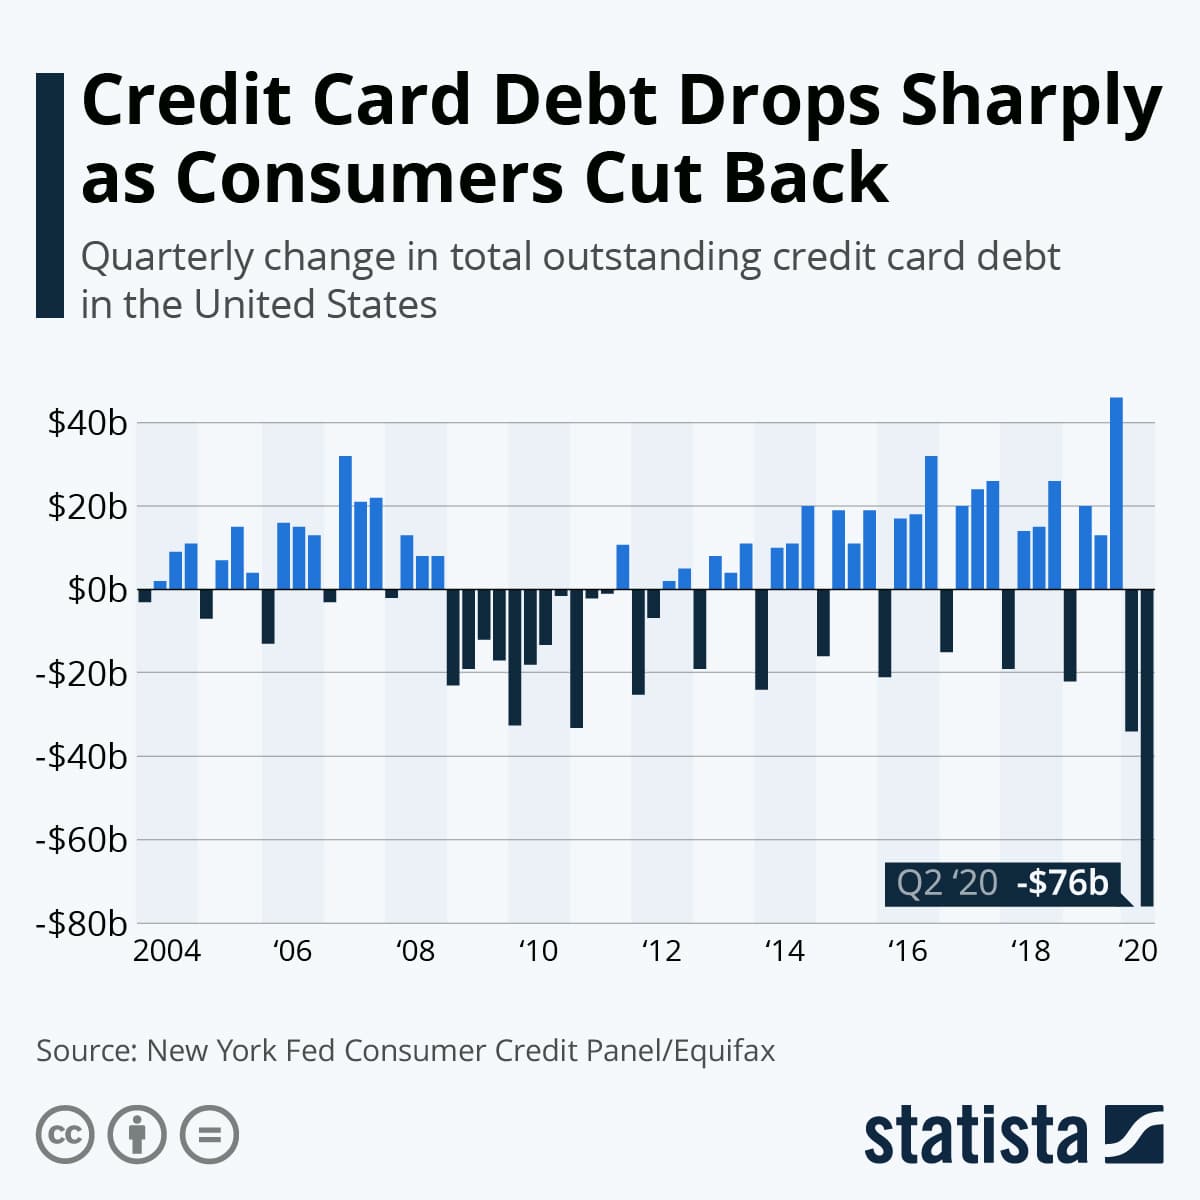 Over the past six months, consumers in the US are taking on less debt ...